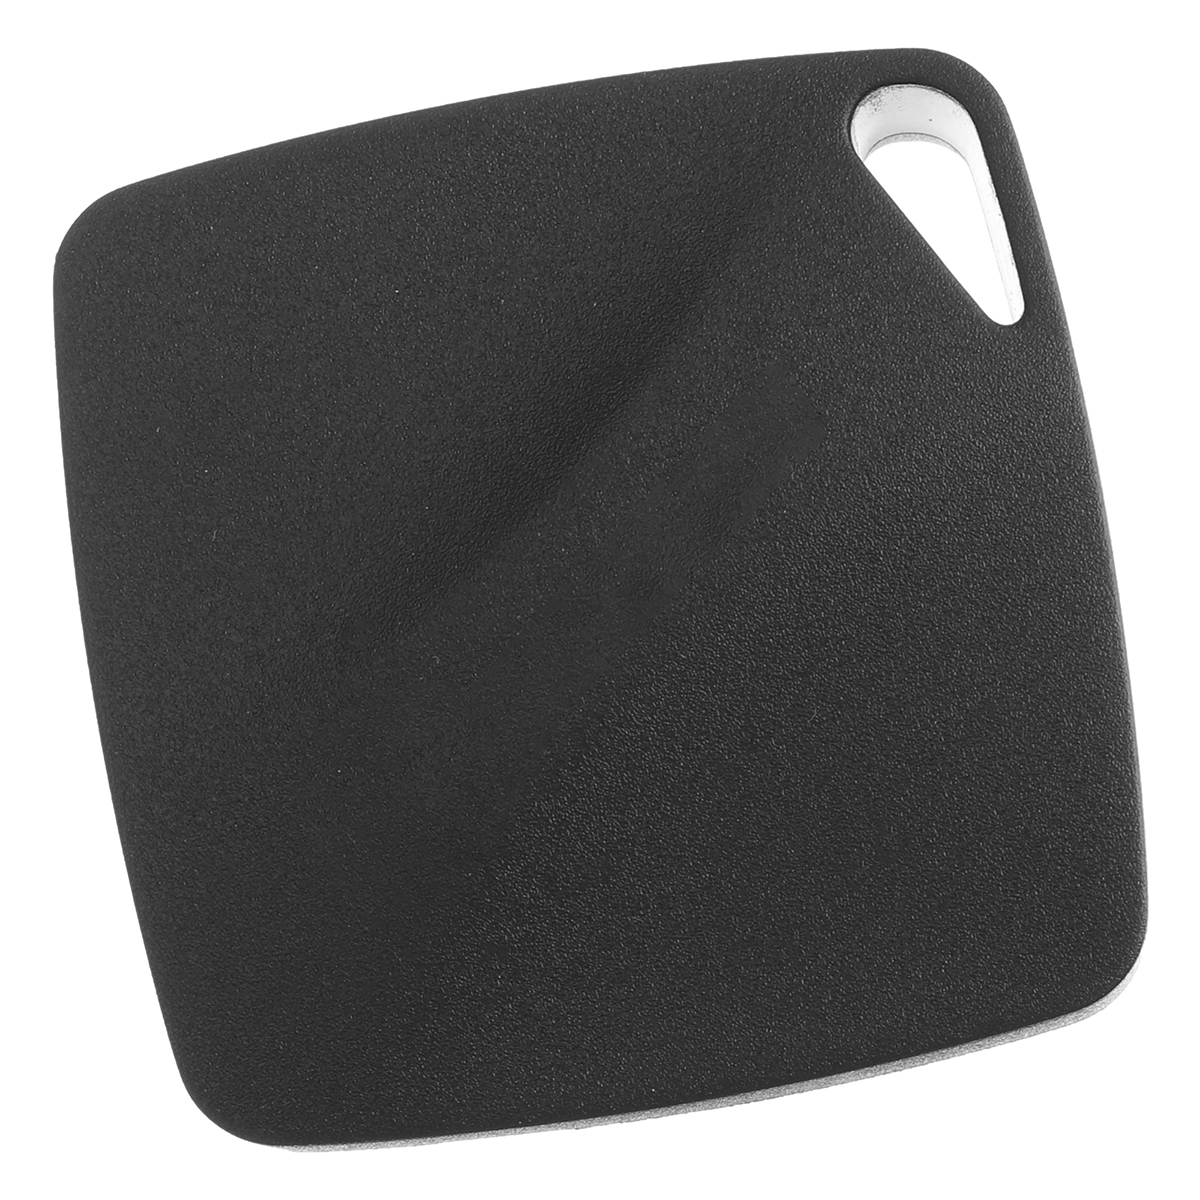 Square-Waterproof-Black-Tracking-Device-Base-Station-Positioning-Location-1725758-4